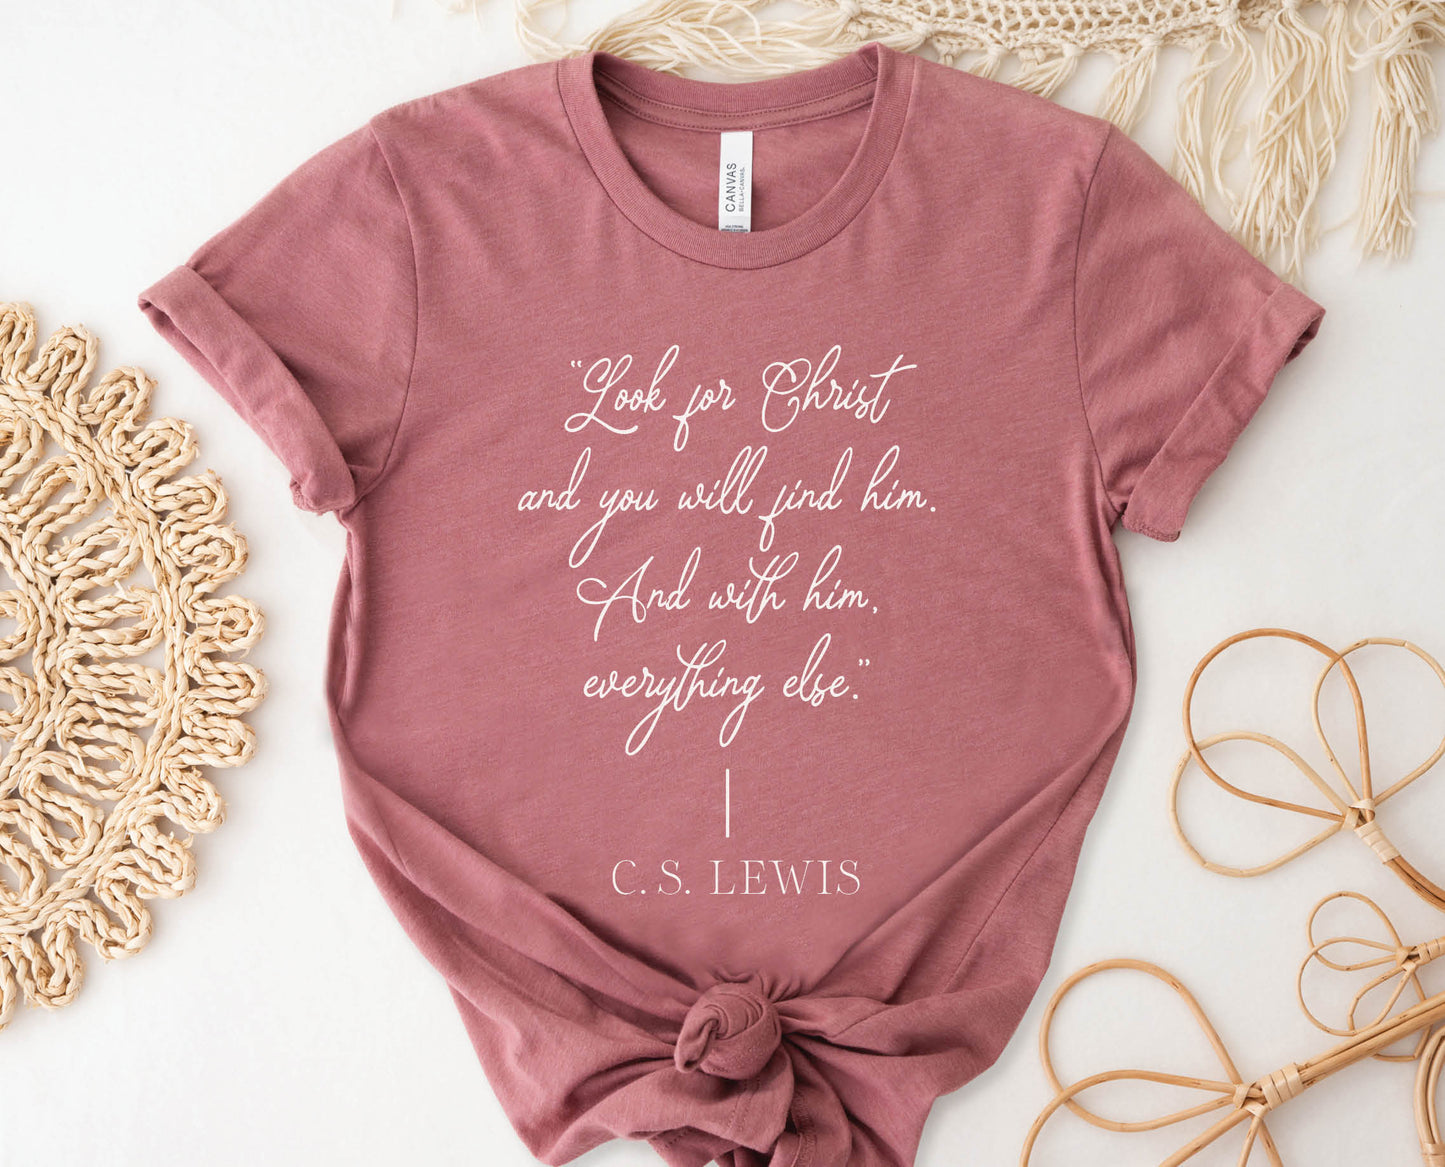 Soft quality mauve dusty rose t-shirt with British writer Narnia author C.S. Lewis quote "Look for Christ and you will find him. And with him, everything else."  printed in white vintage script - Christian aesthetic unisex tee shirt design for women